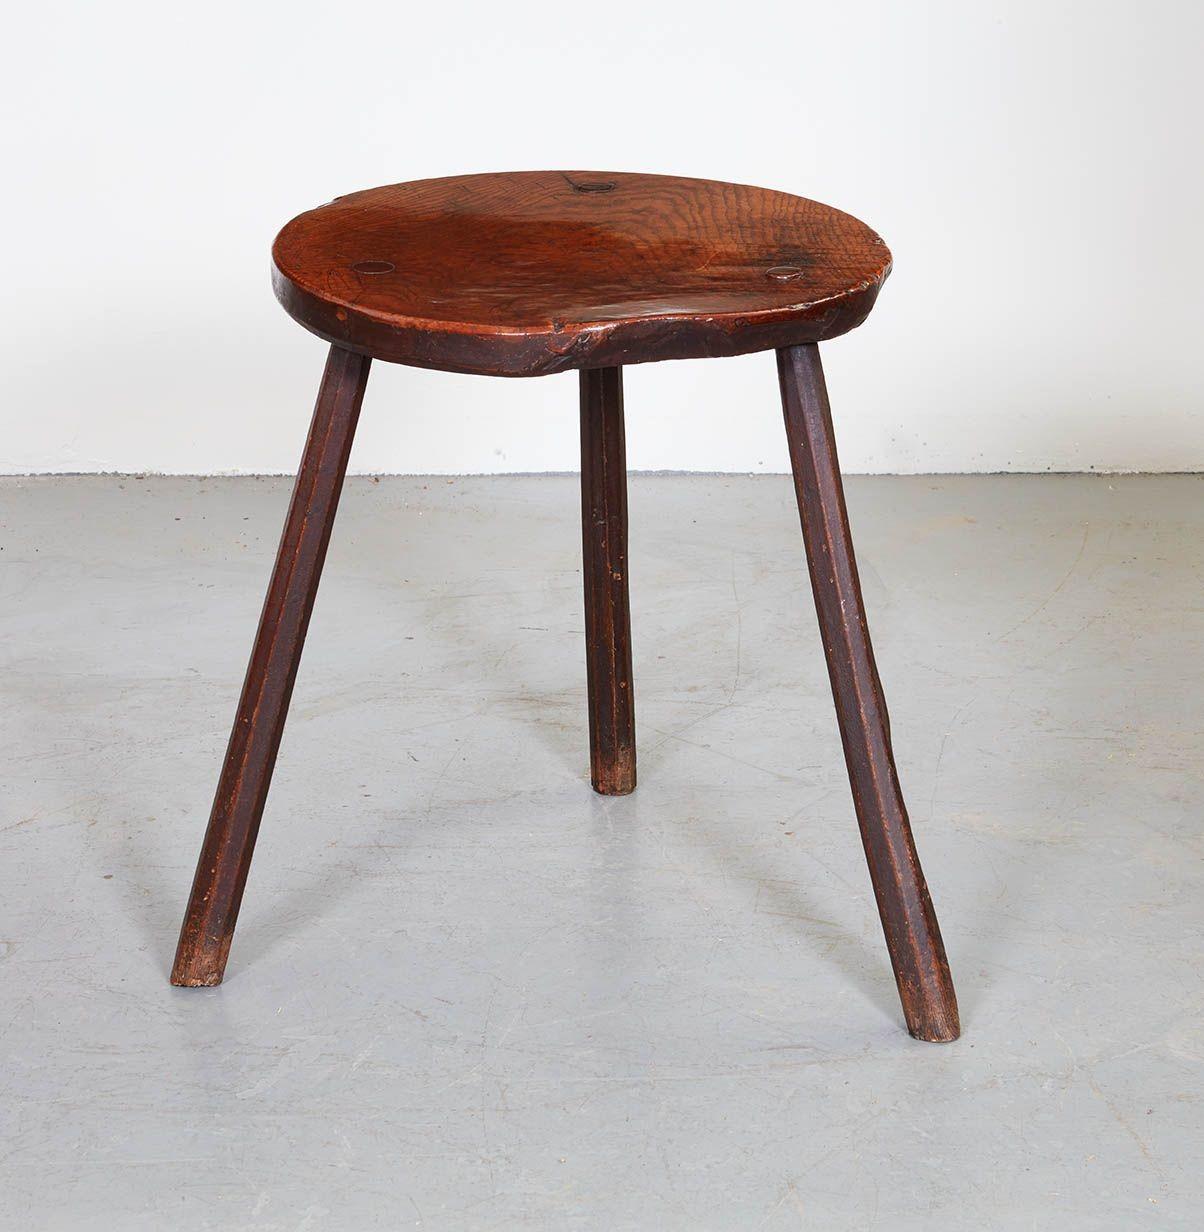 A desirable Welsh thick top cricket table having good nutty color and patina with 1